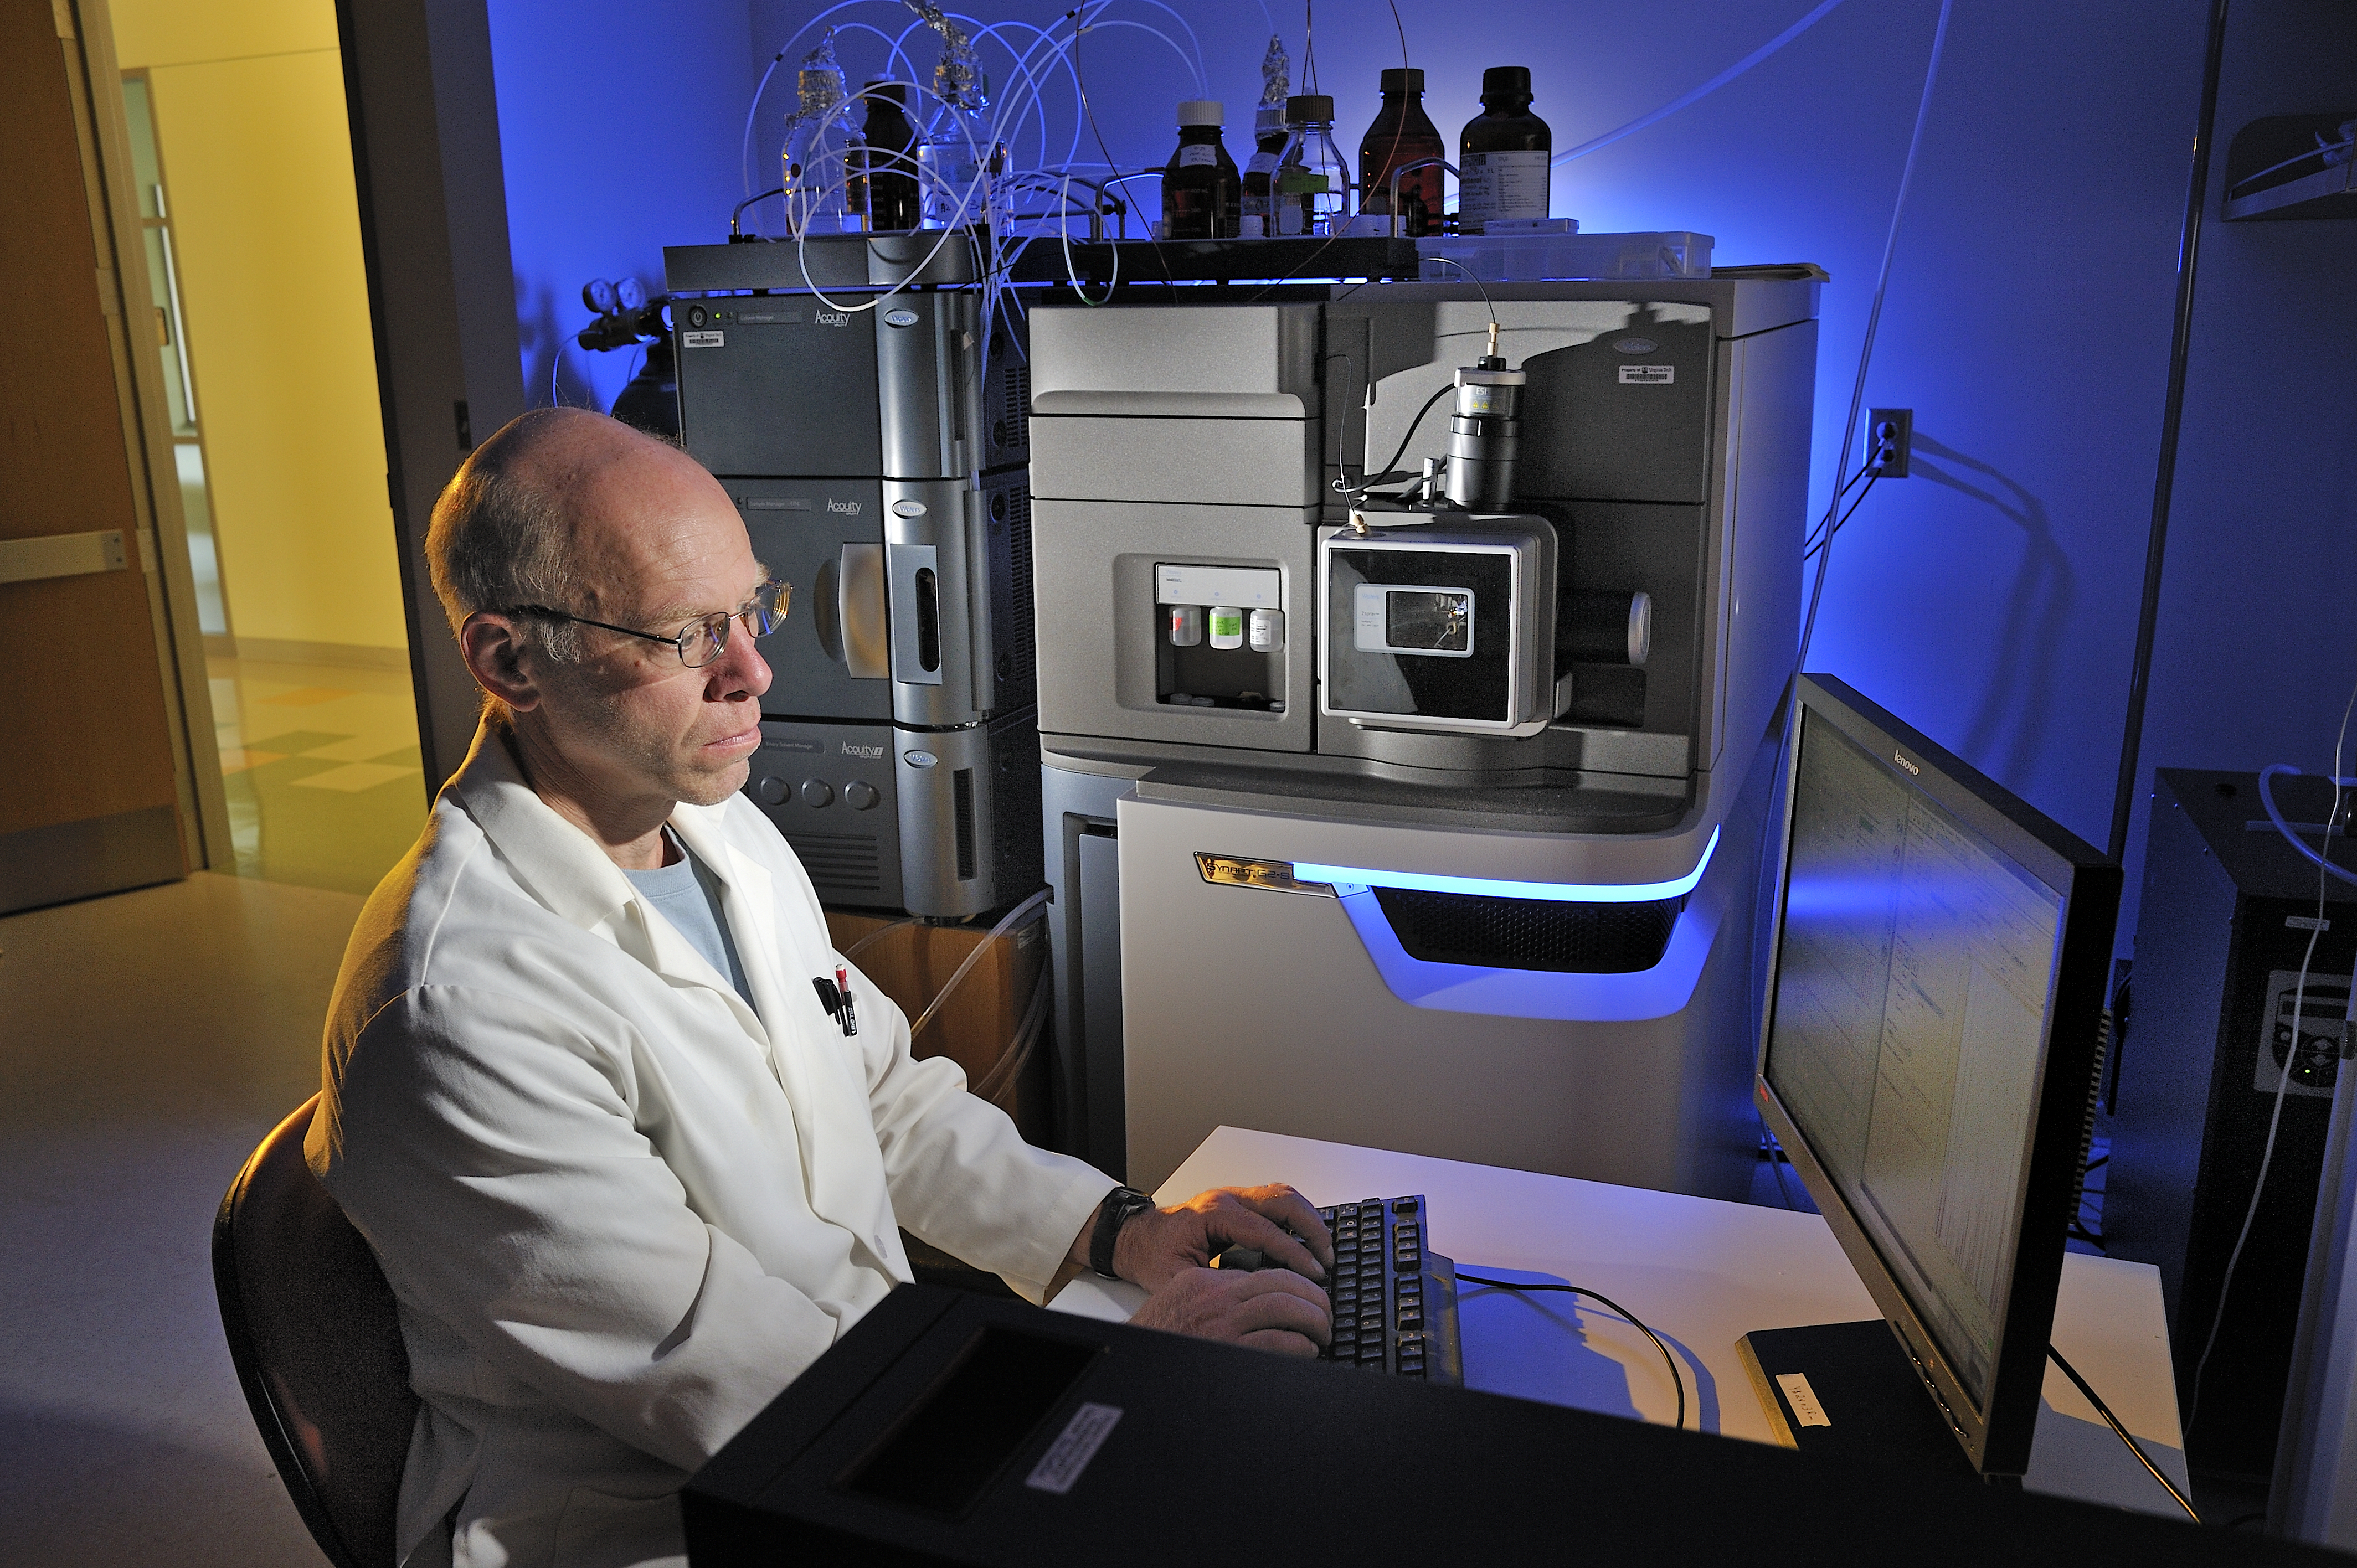 Rich Helm, an associate professor of biochemistry in the College of Agriculture and Life Sciences, uses the new liquid chromatography-mass spectrometer housed in the college.